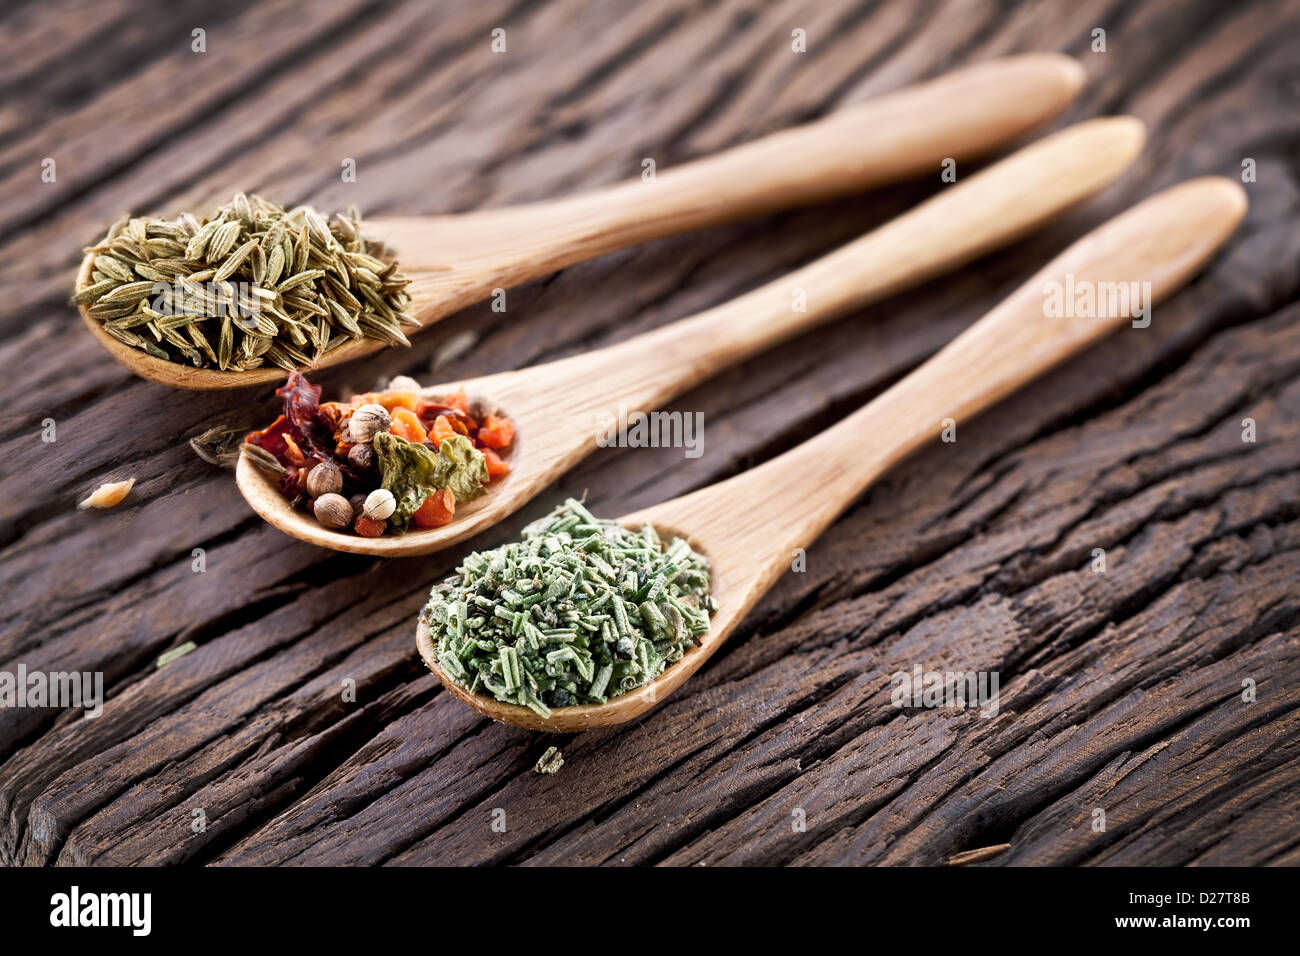 Variety of spices in the spoons on an old wooden table. Stock Photo